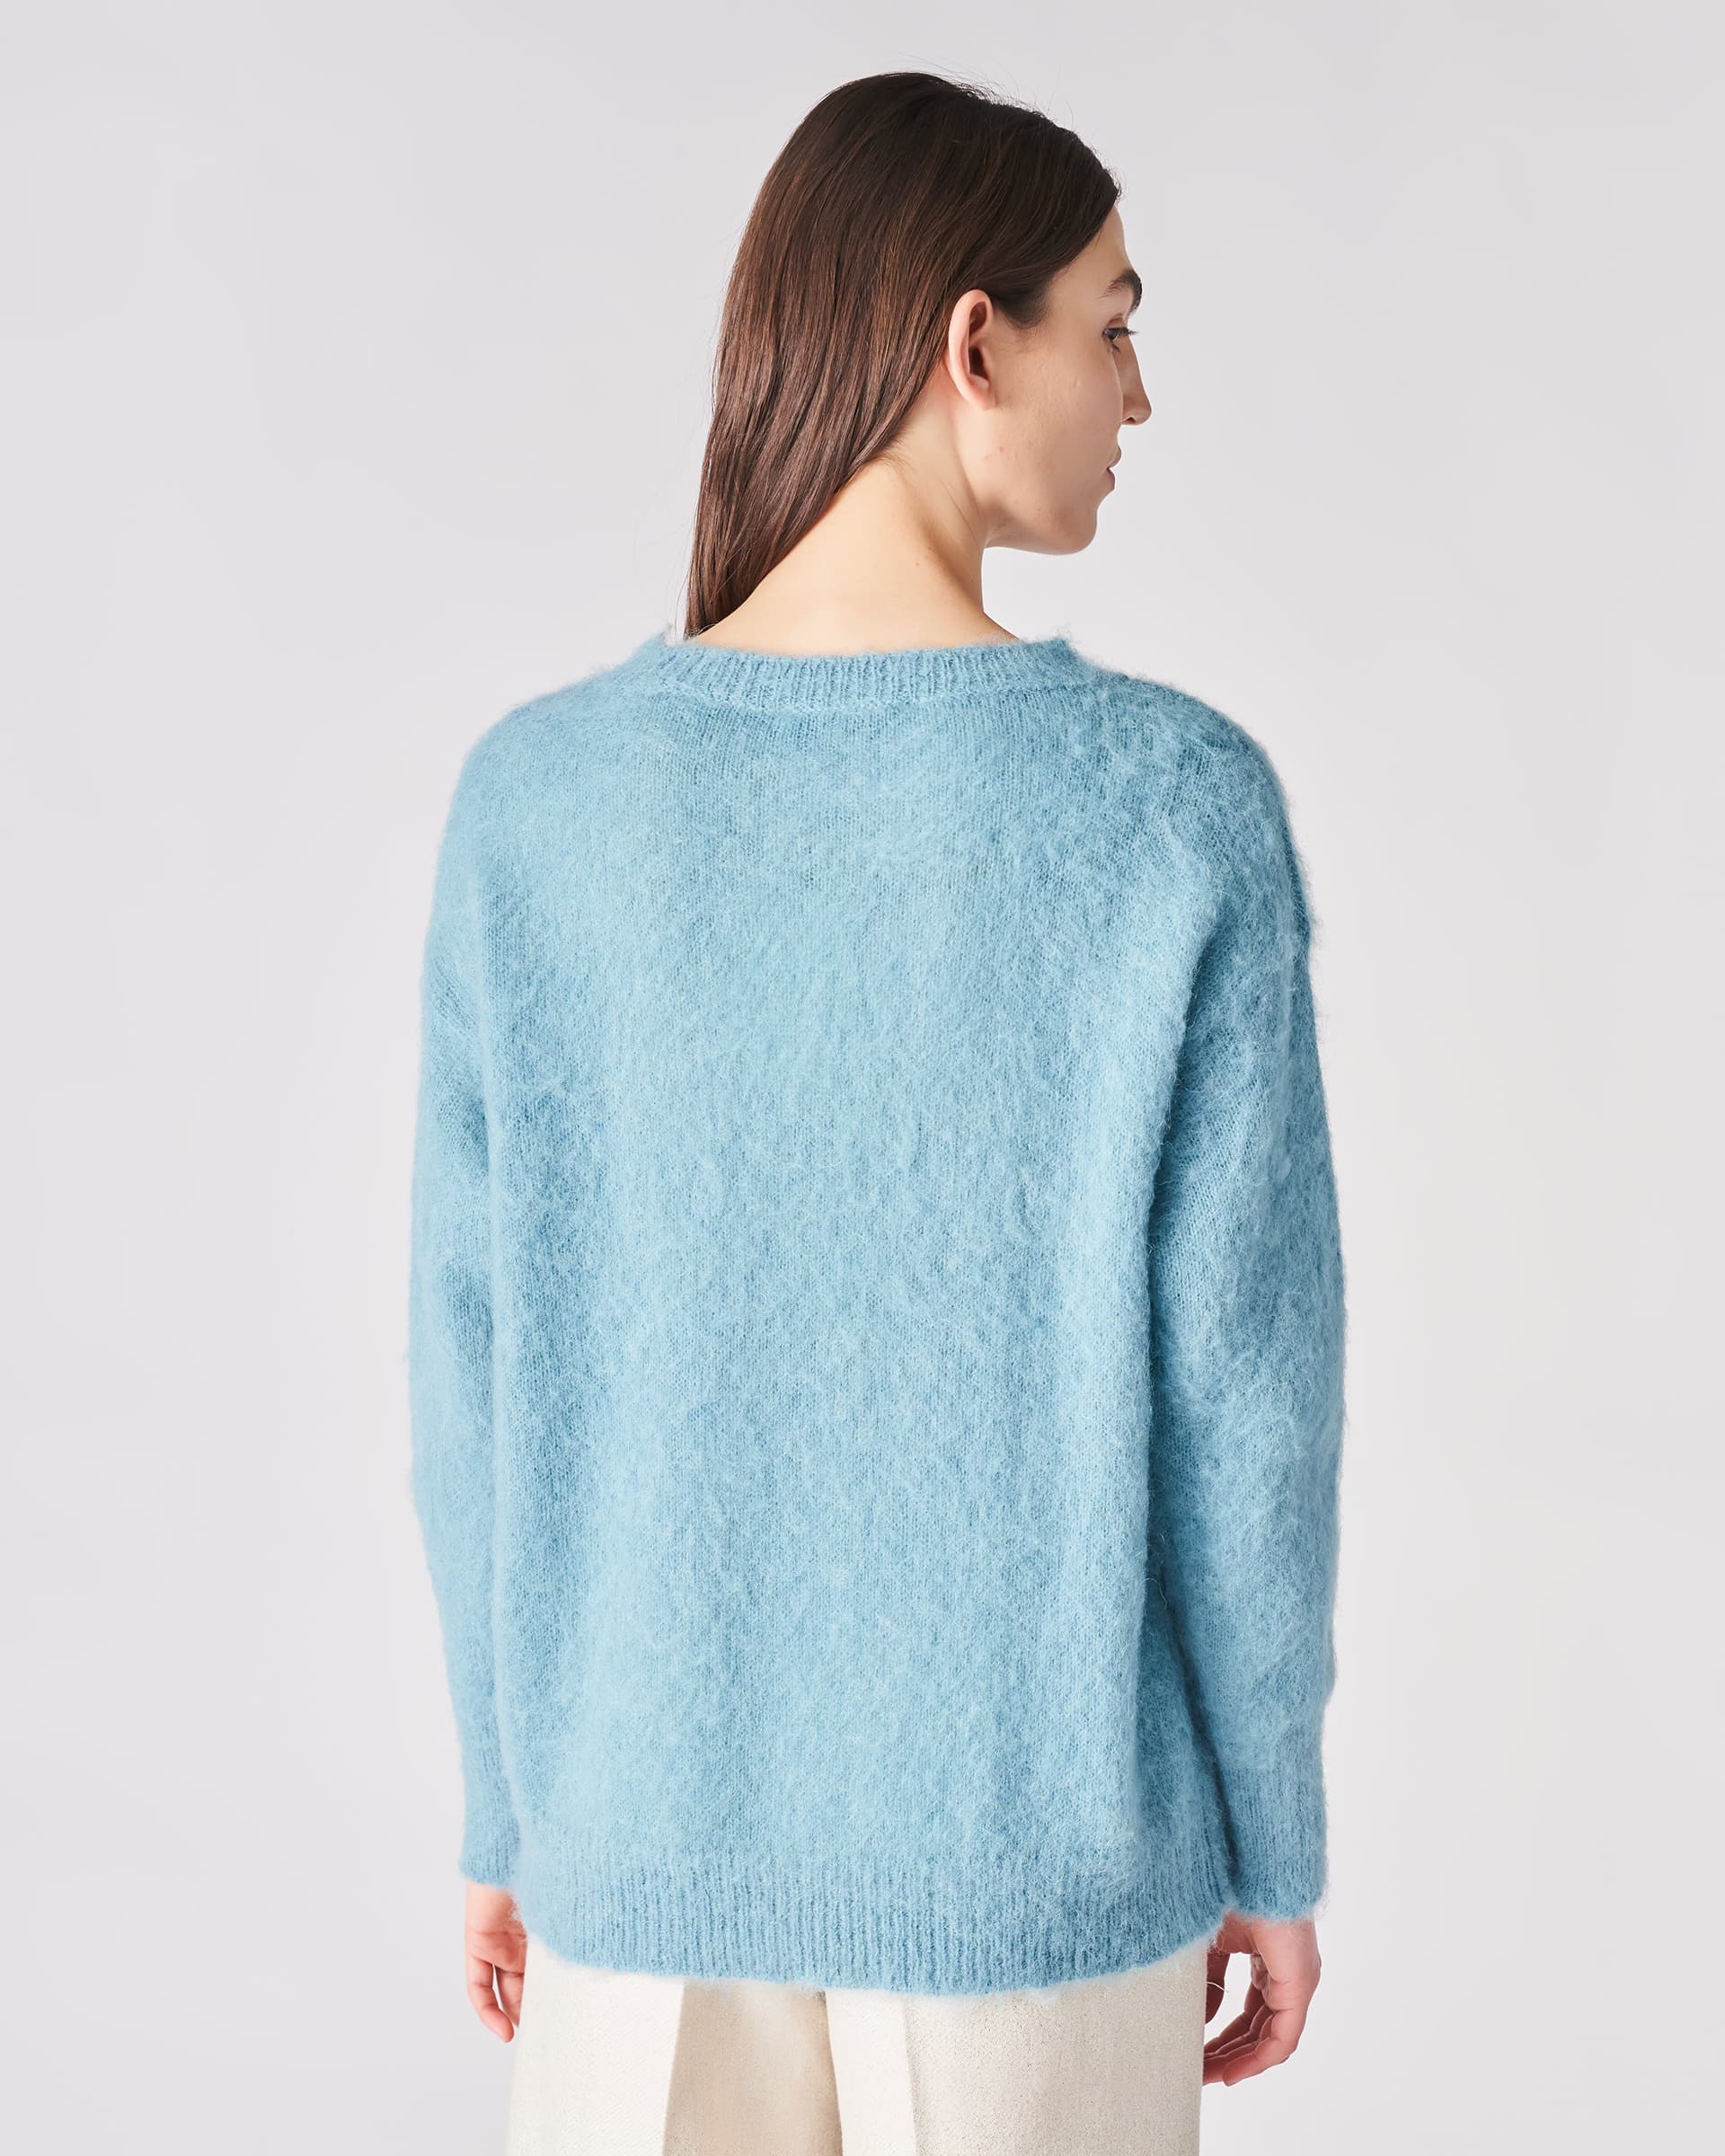 The Market Store | Brushed Crew Neck Sweater